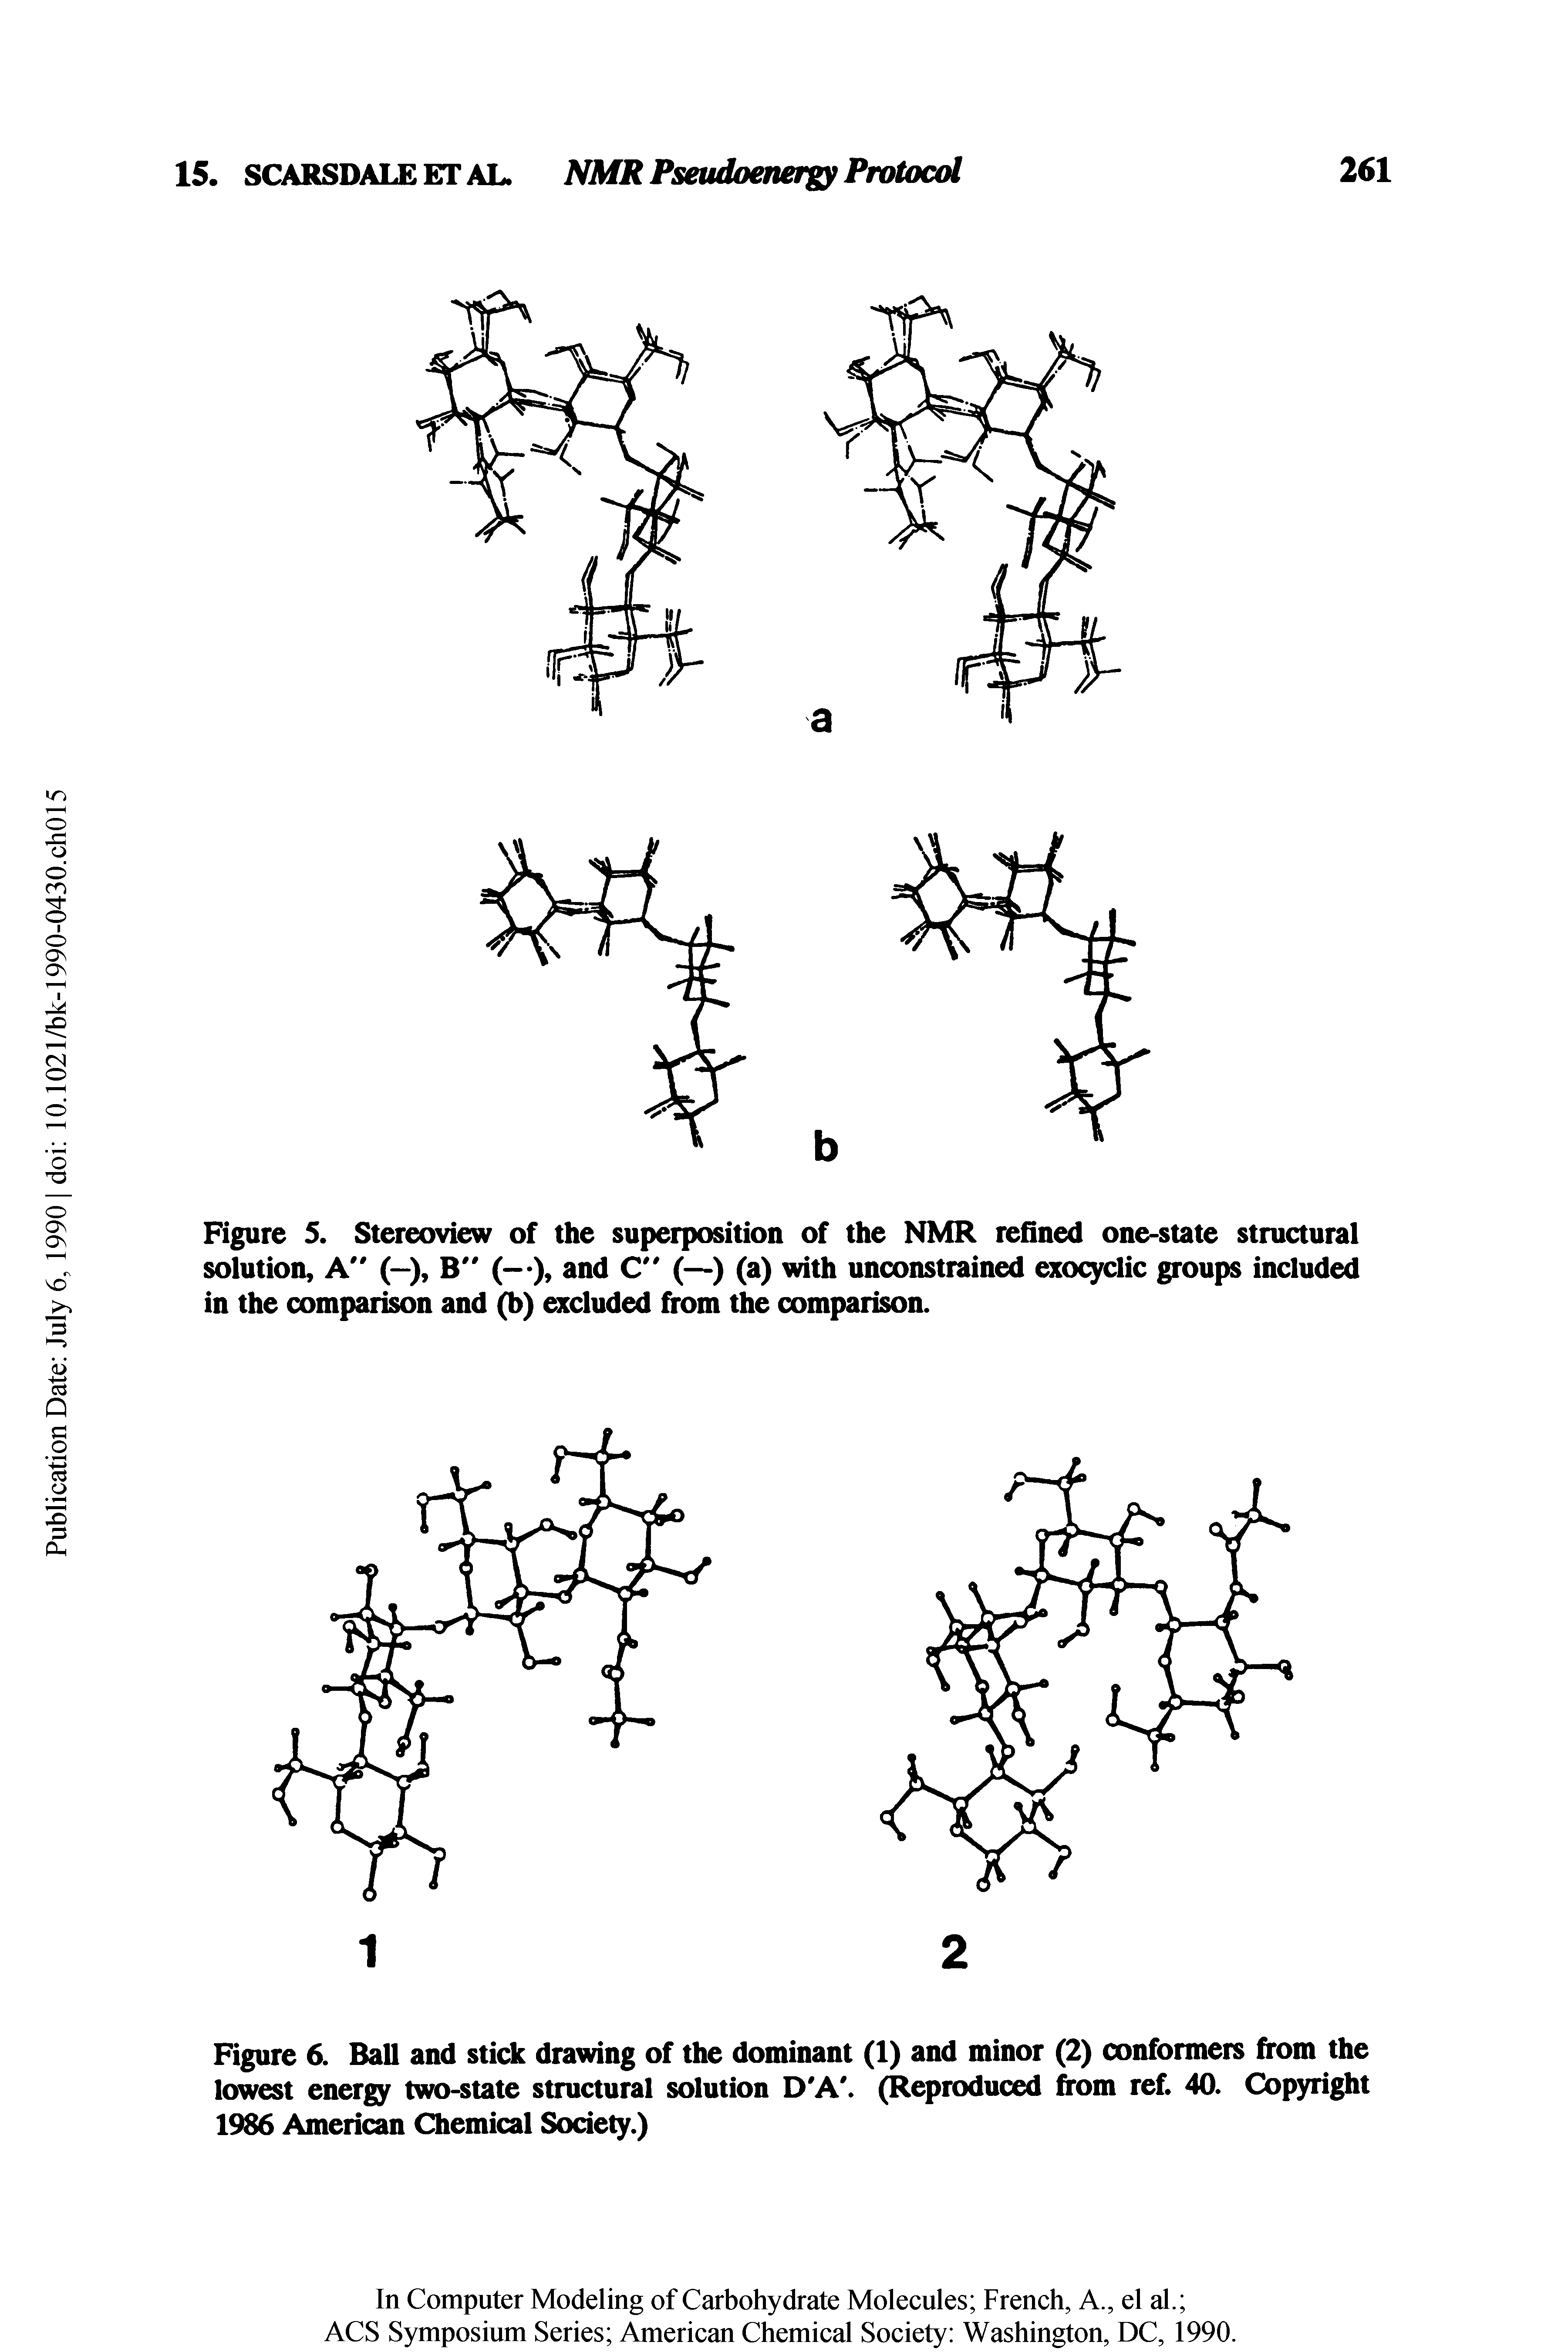 Figure 5. Stereoview of the superposition of the NMR refined one-state structural solution. A" (—), B" (- ), and C" (—) (a) with unconstrained exocyclic groups included in the comparison and (b) excluded from the comparison.